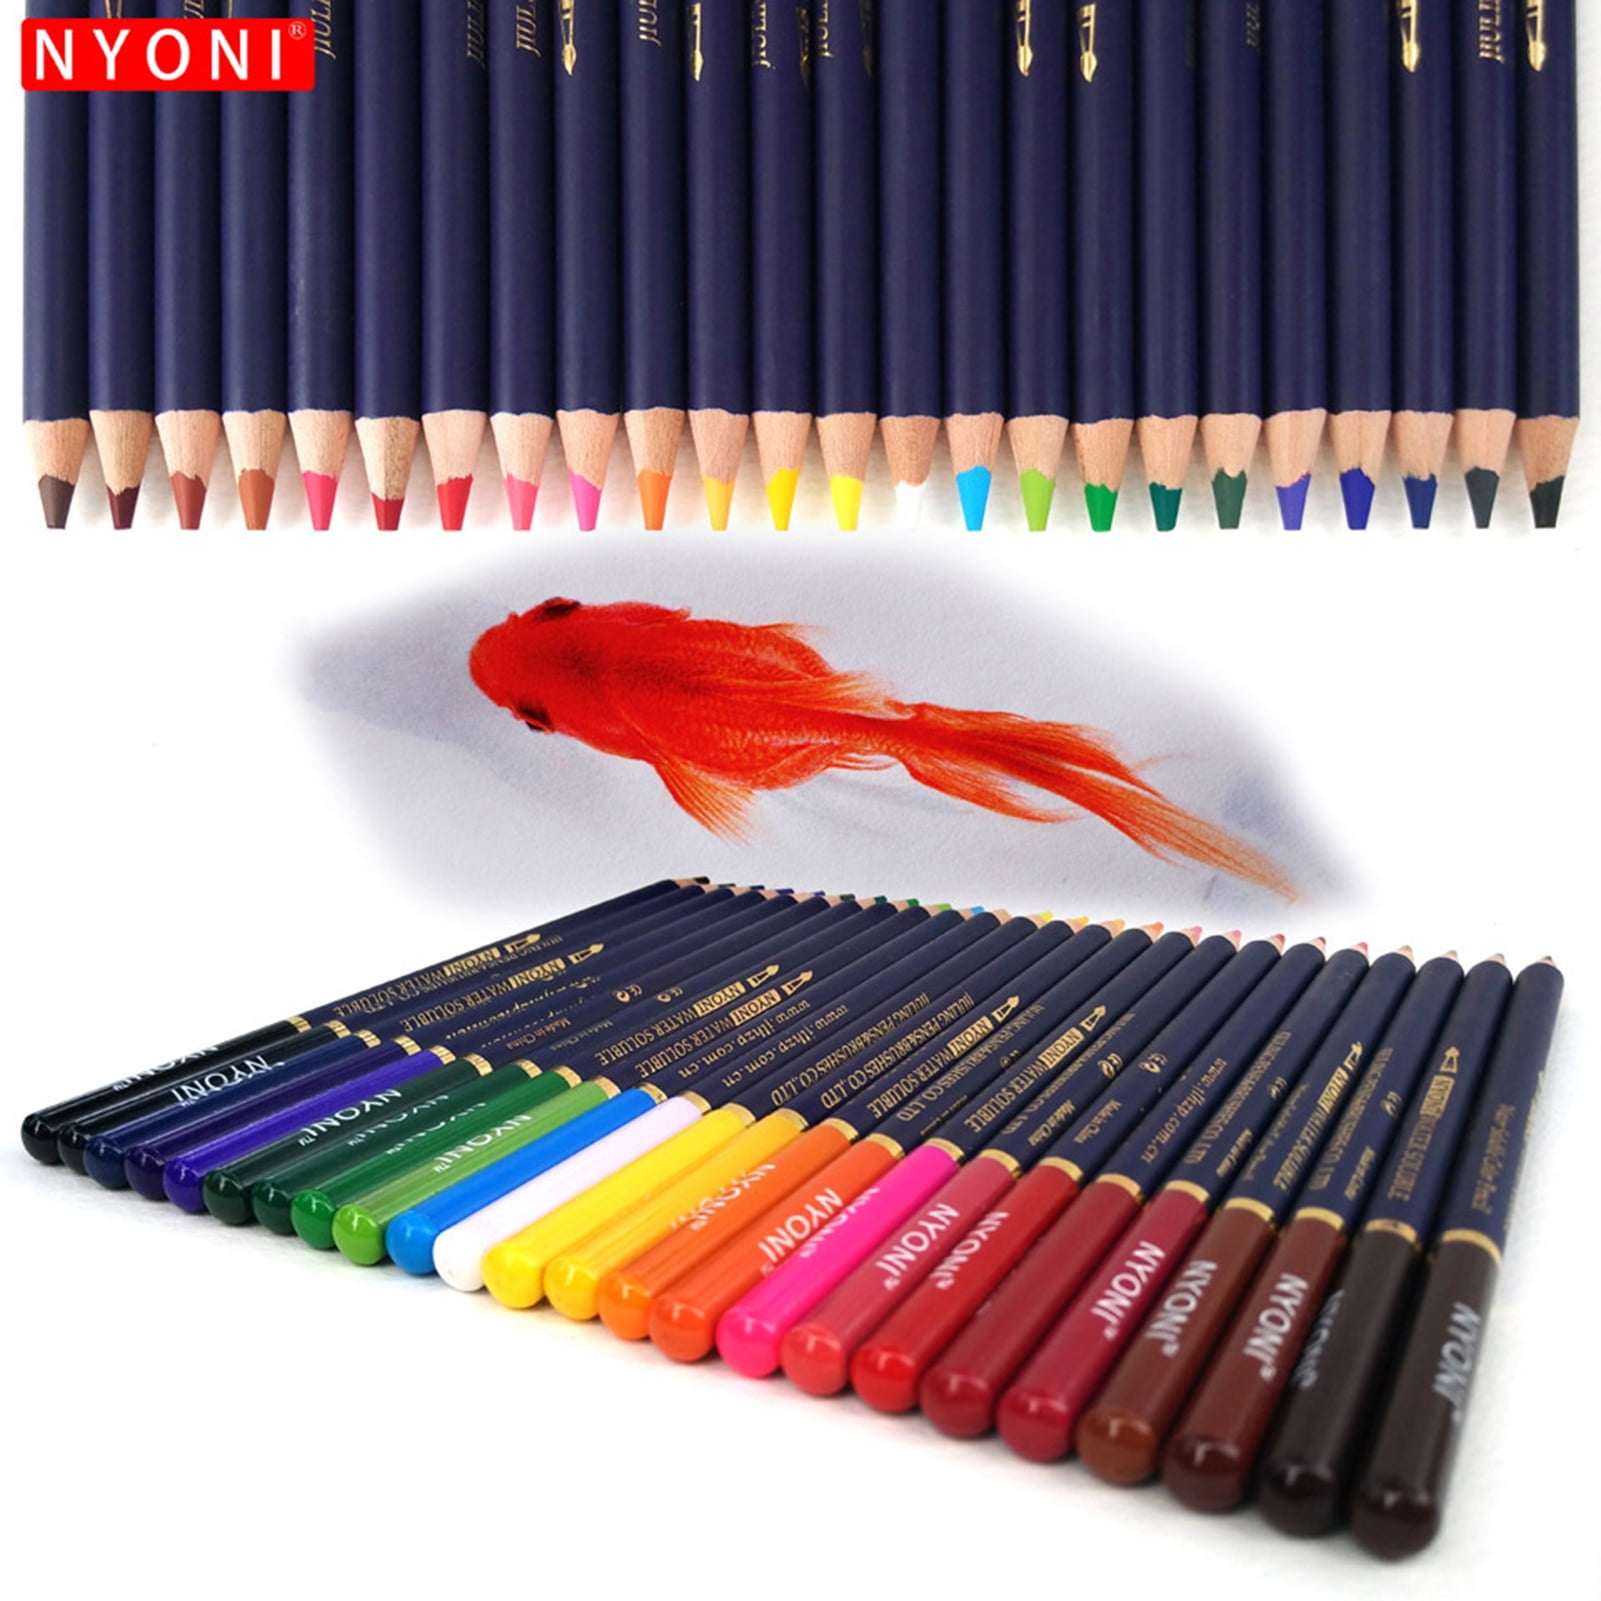 NYONI Professional Colored Pencils, Colored Pencils for Adult Coloring Set  of 120 Colors,Drawing Pencil for